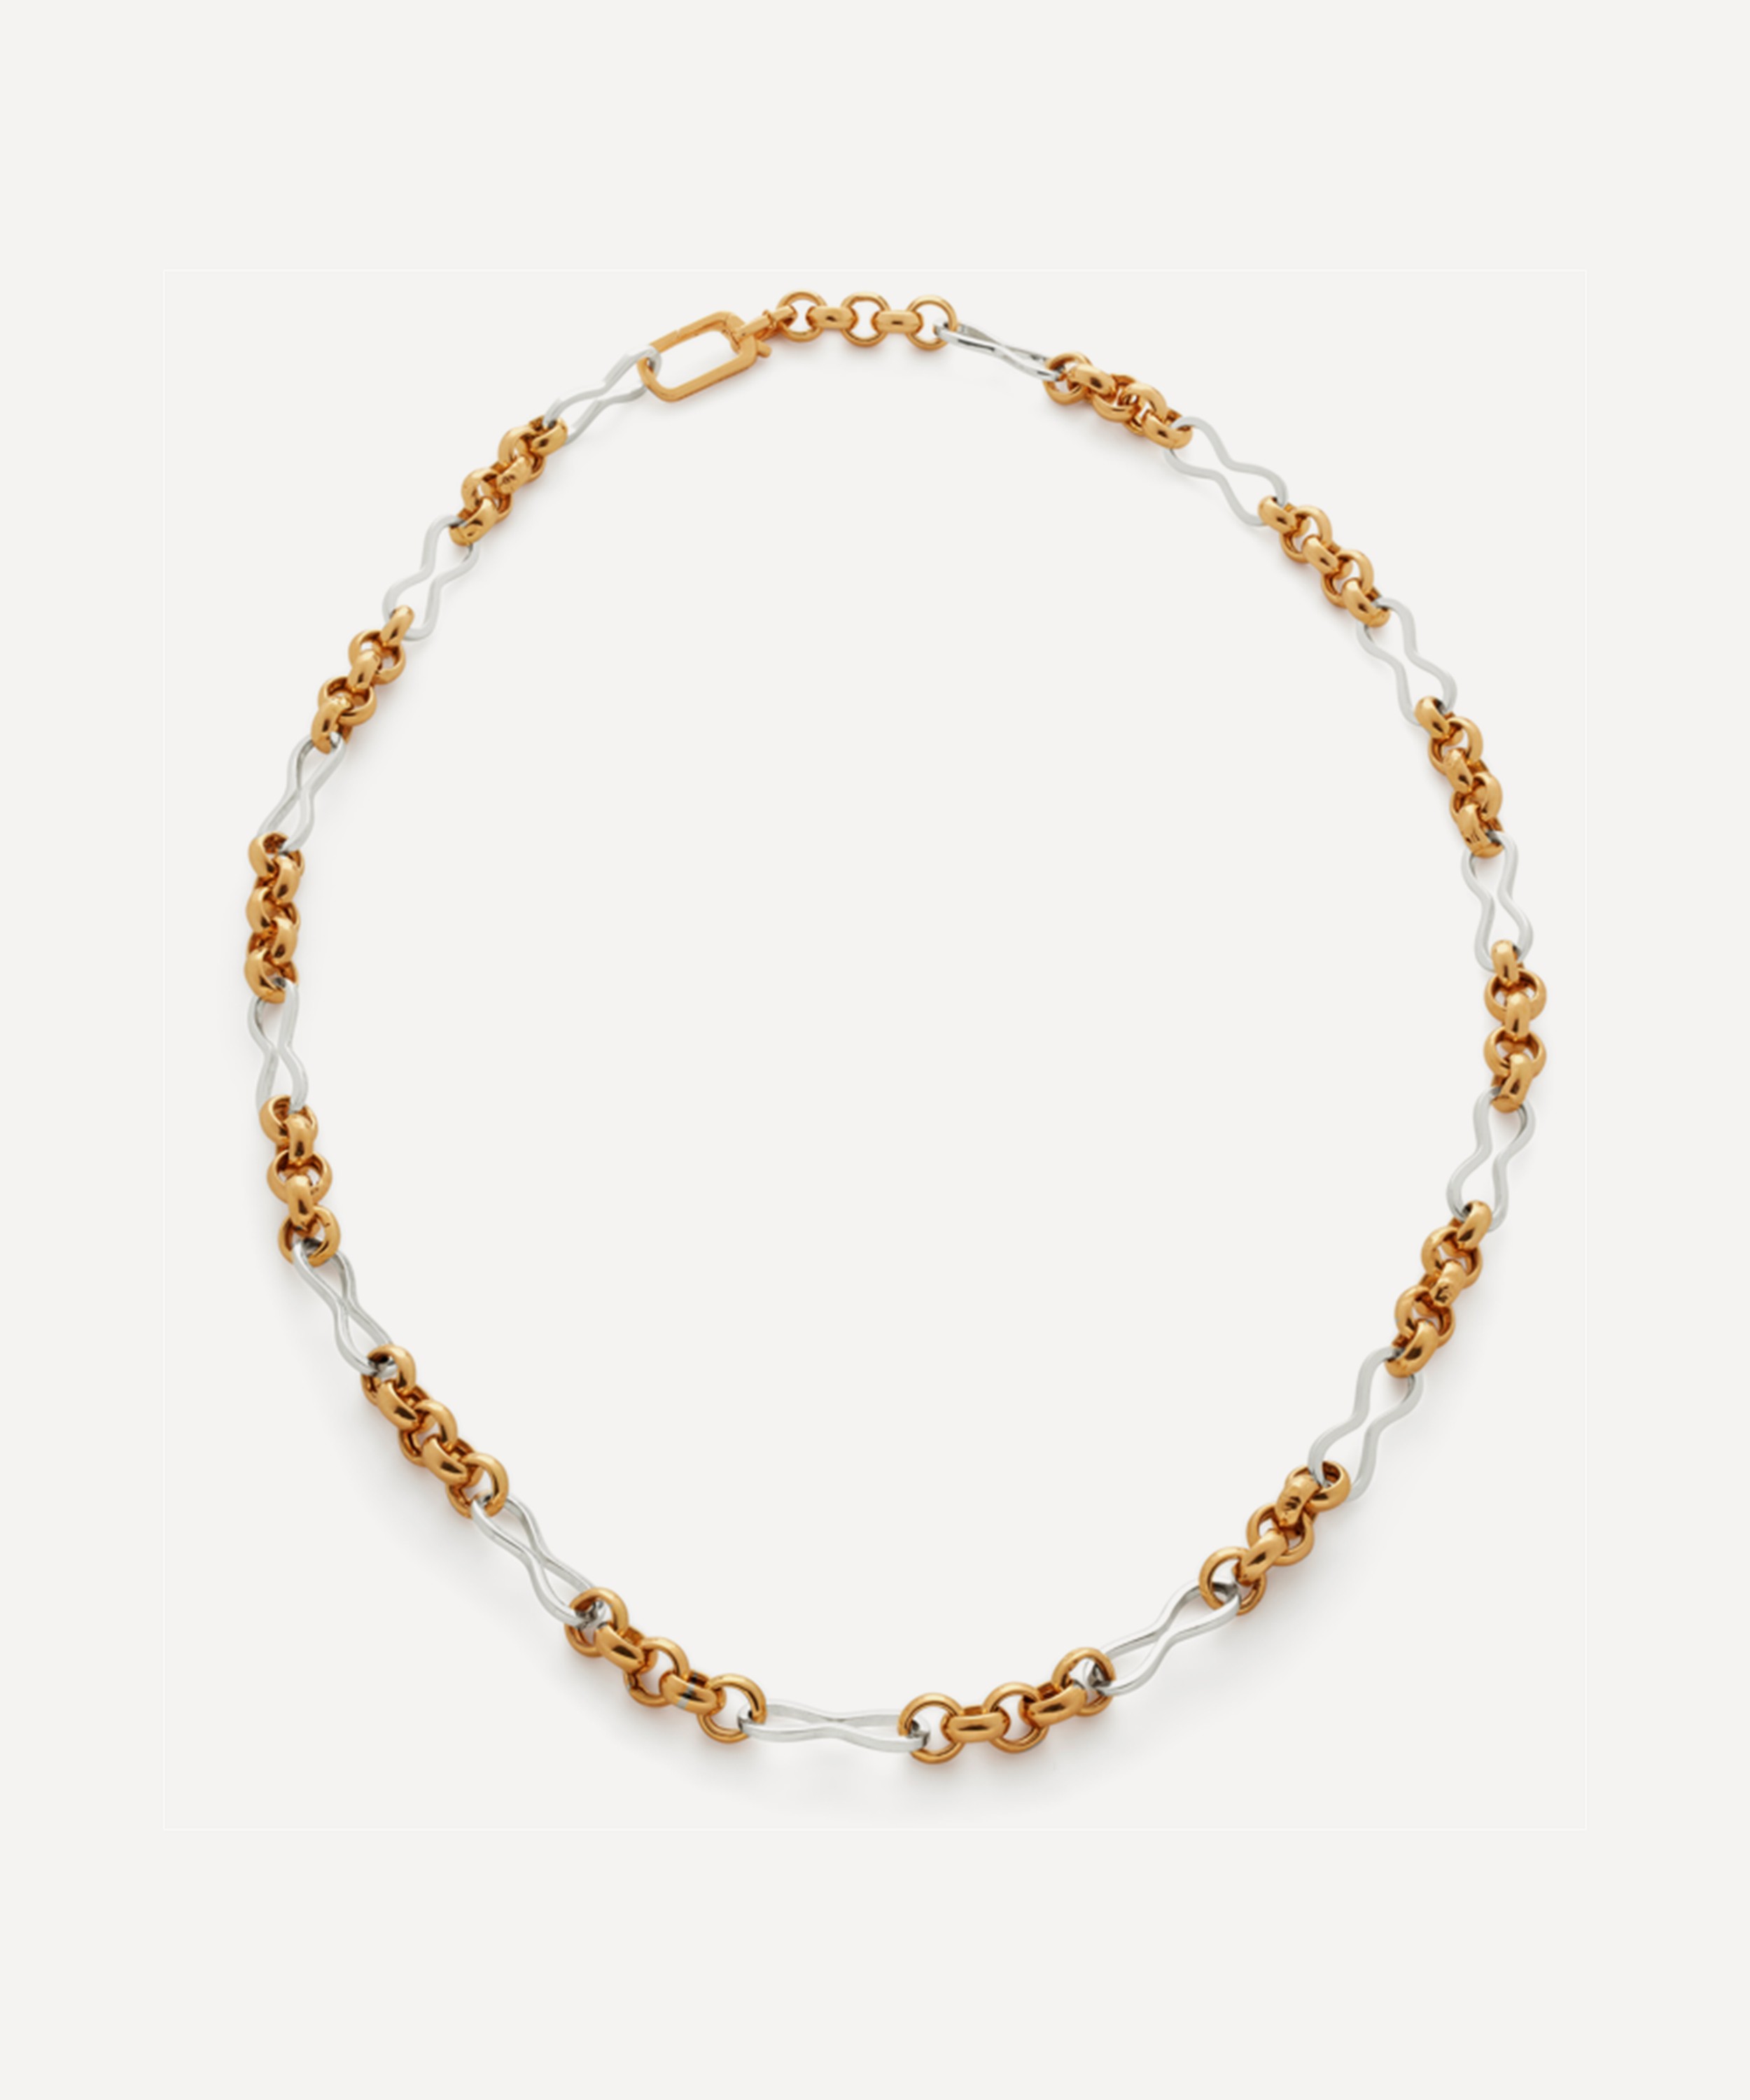 Vinader | Necklace Heritage Link Metal Mixed Chain Monica Liberty